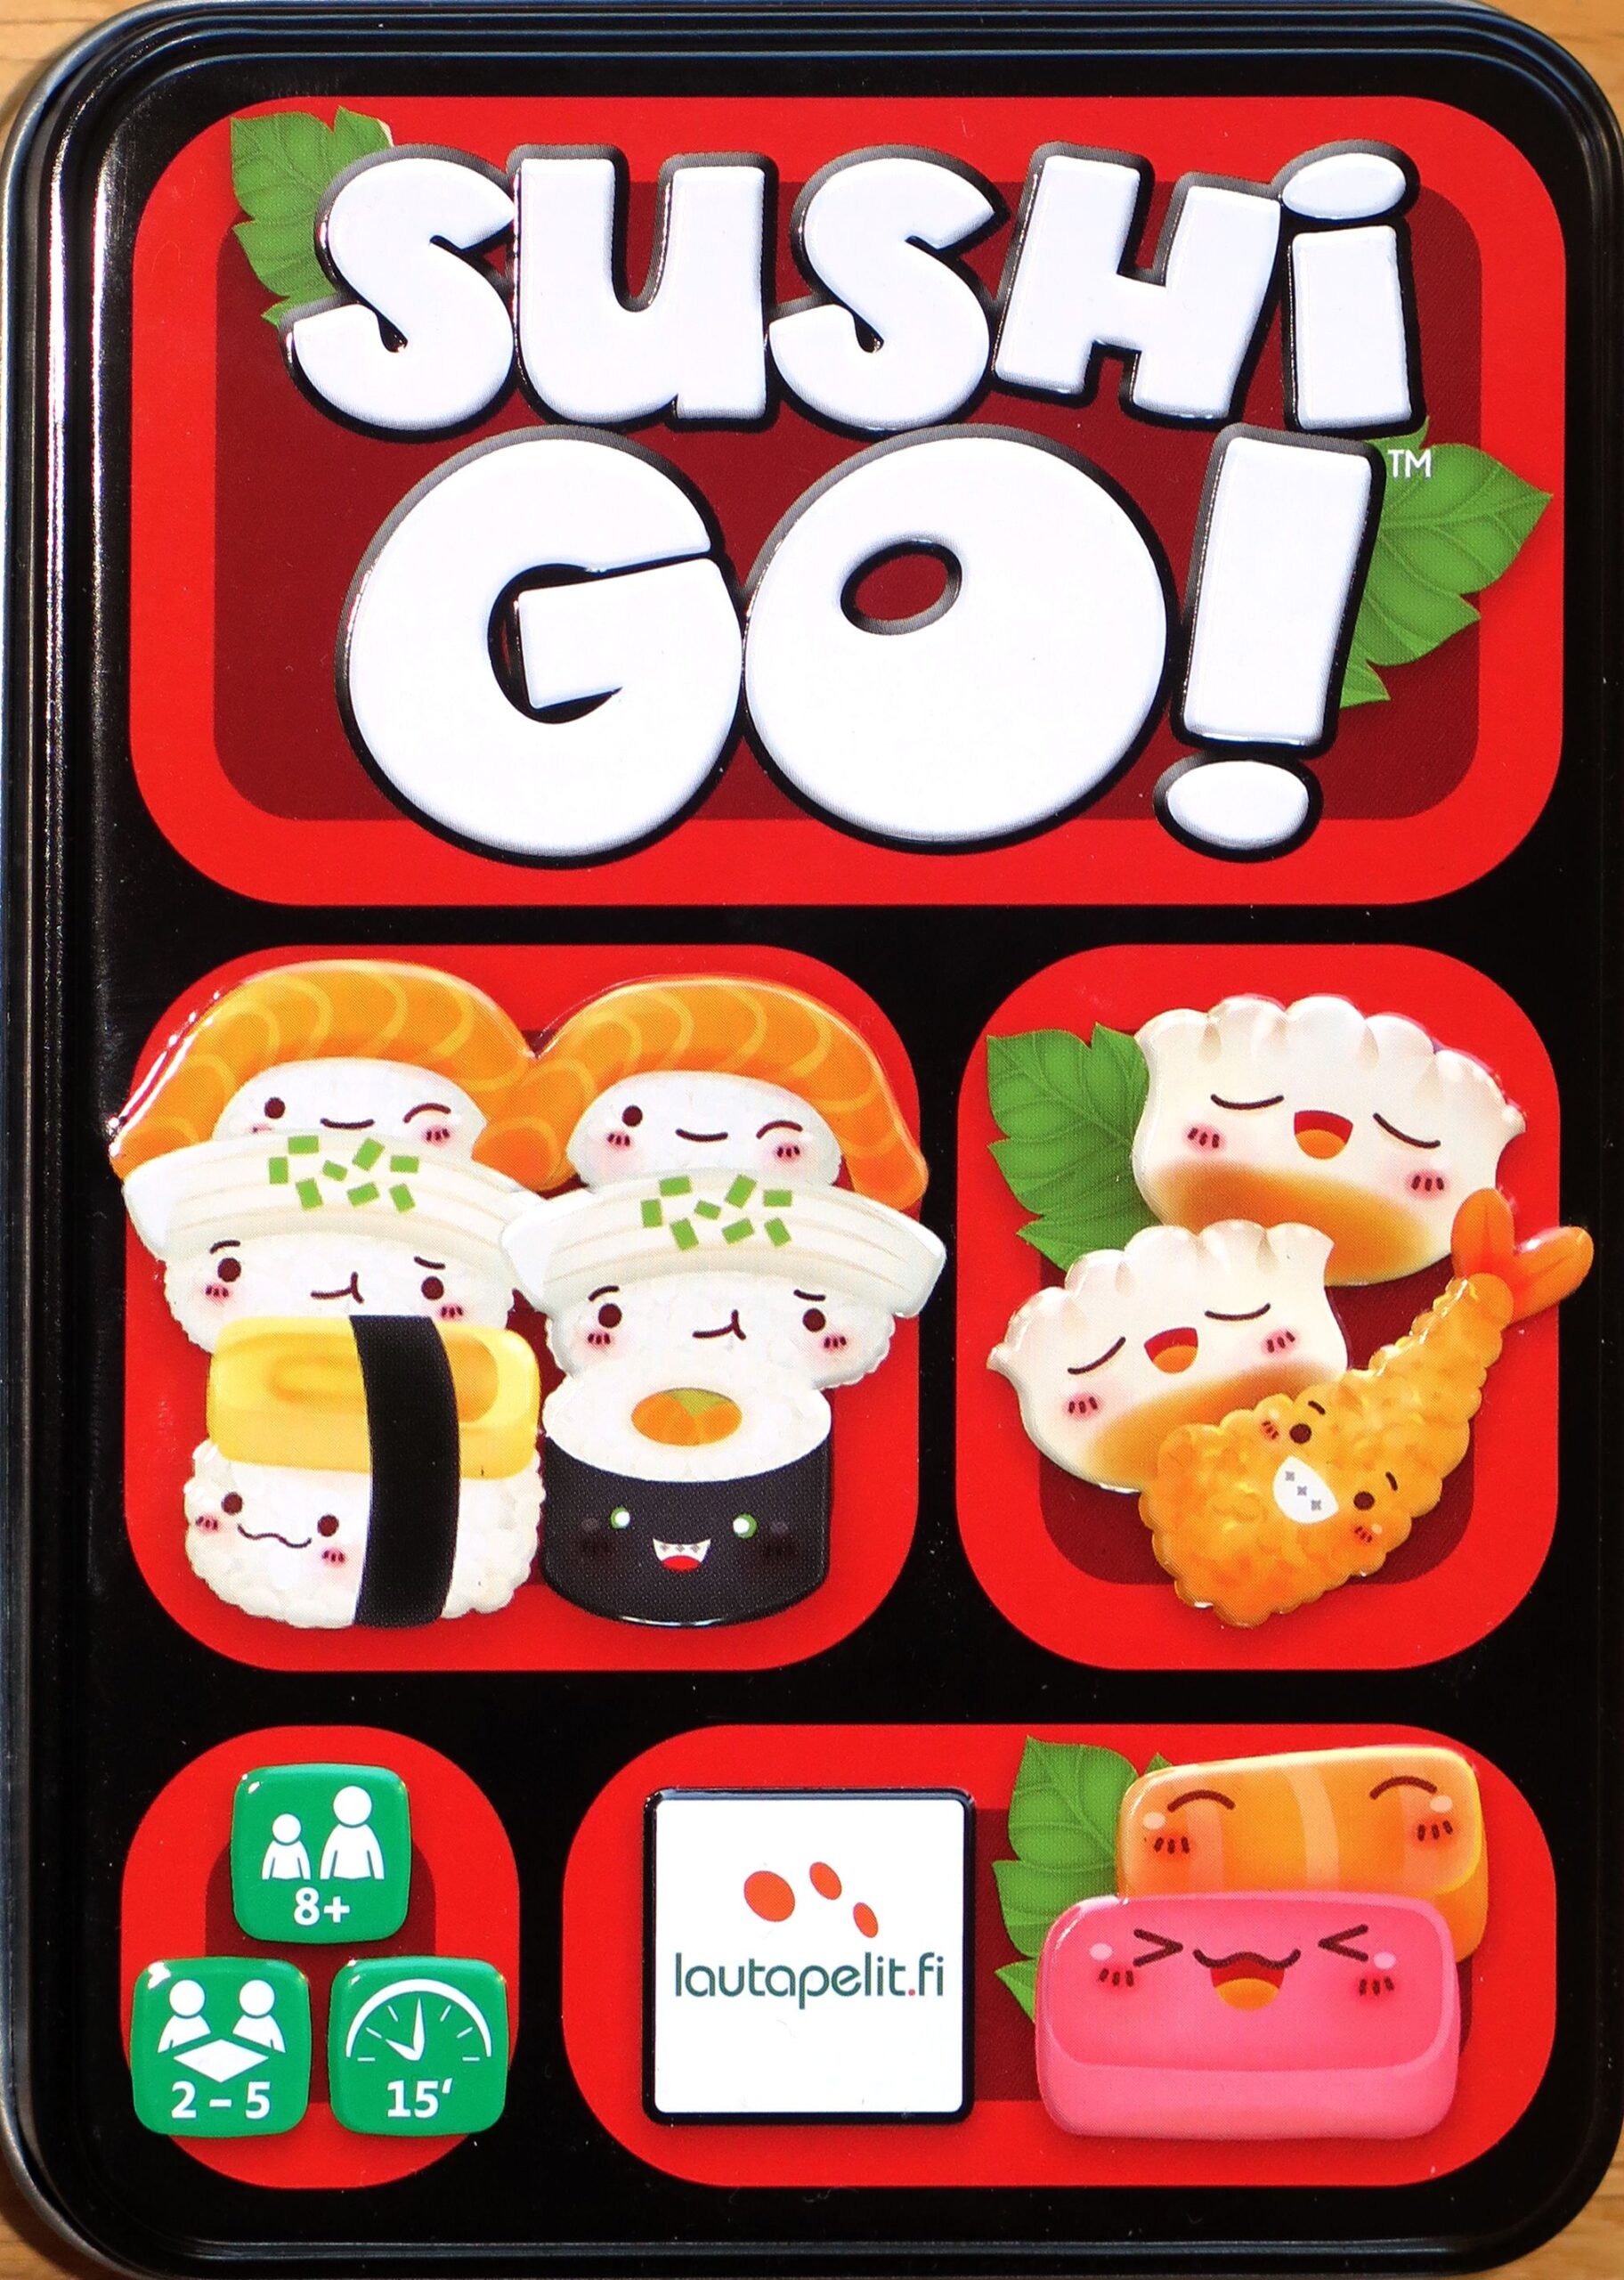 Read more about the article Sushi go!